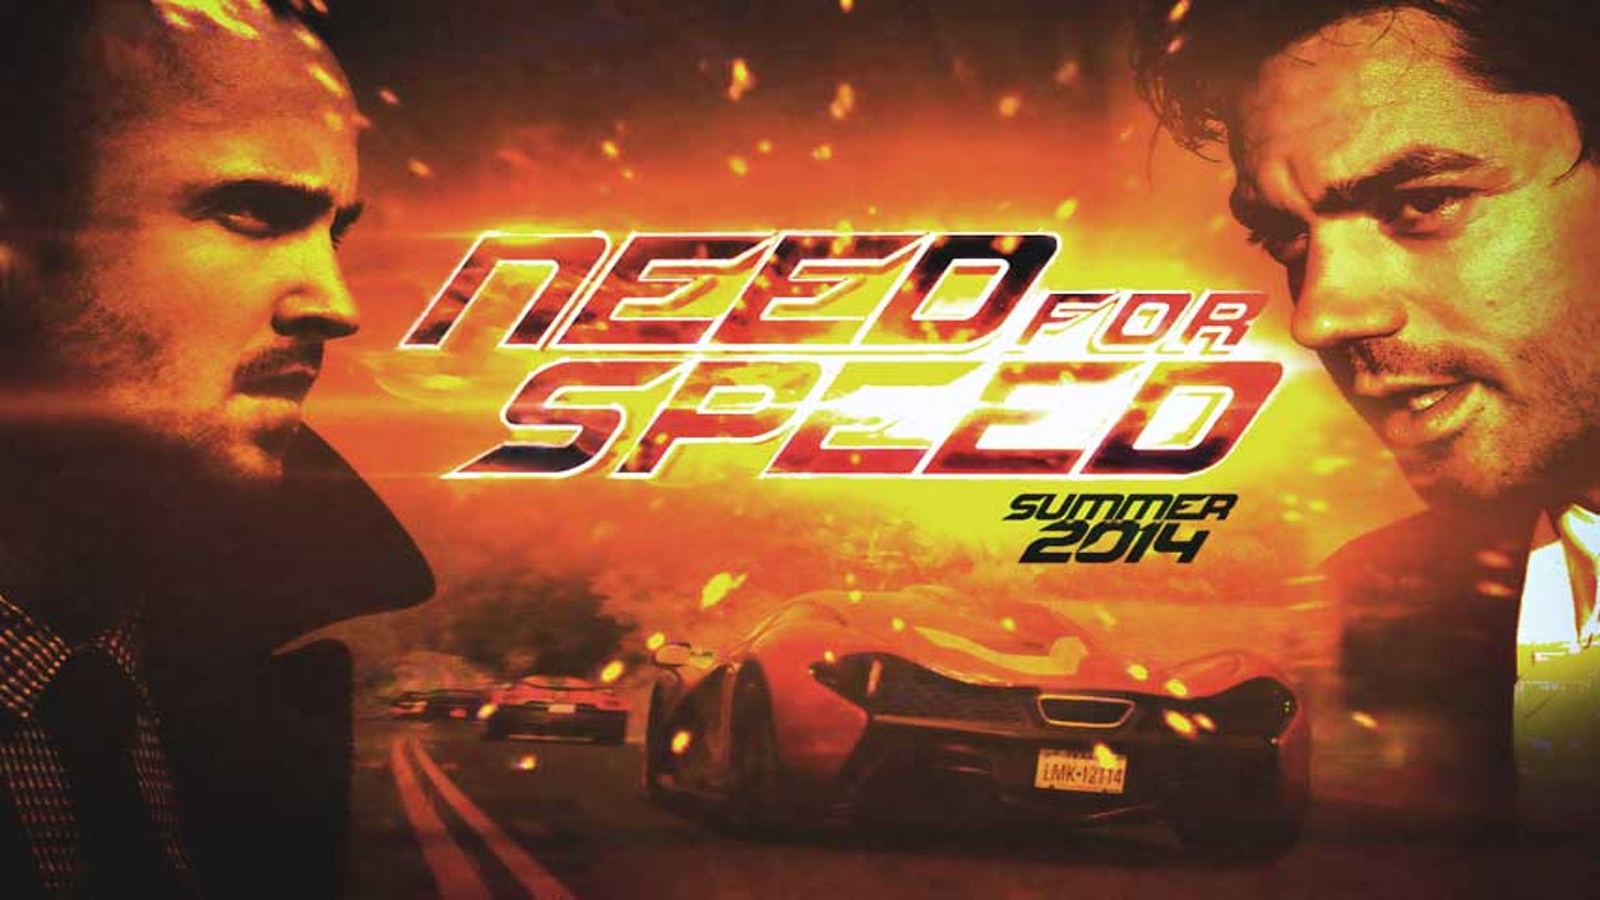 Need for Speed The movie Is probably the best game/movie